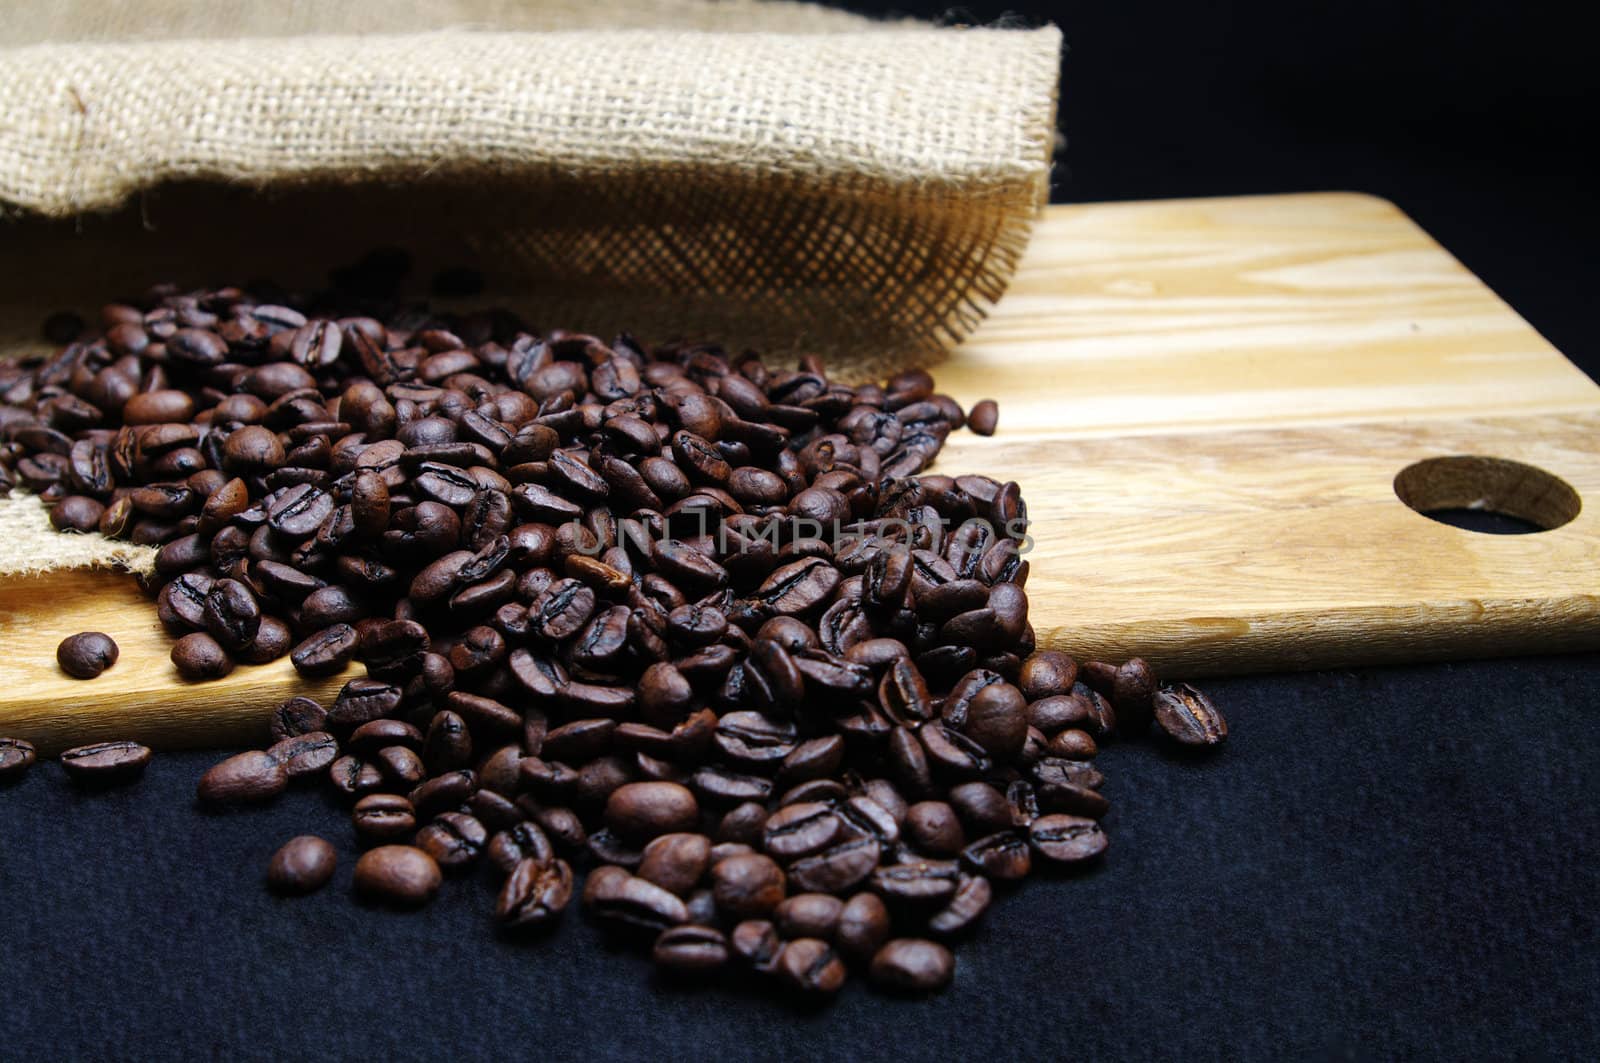 Coffee Beans and Burlap by edcorey